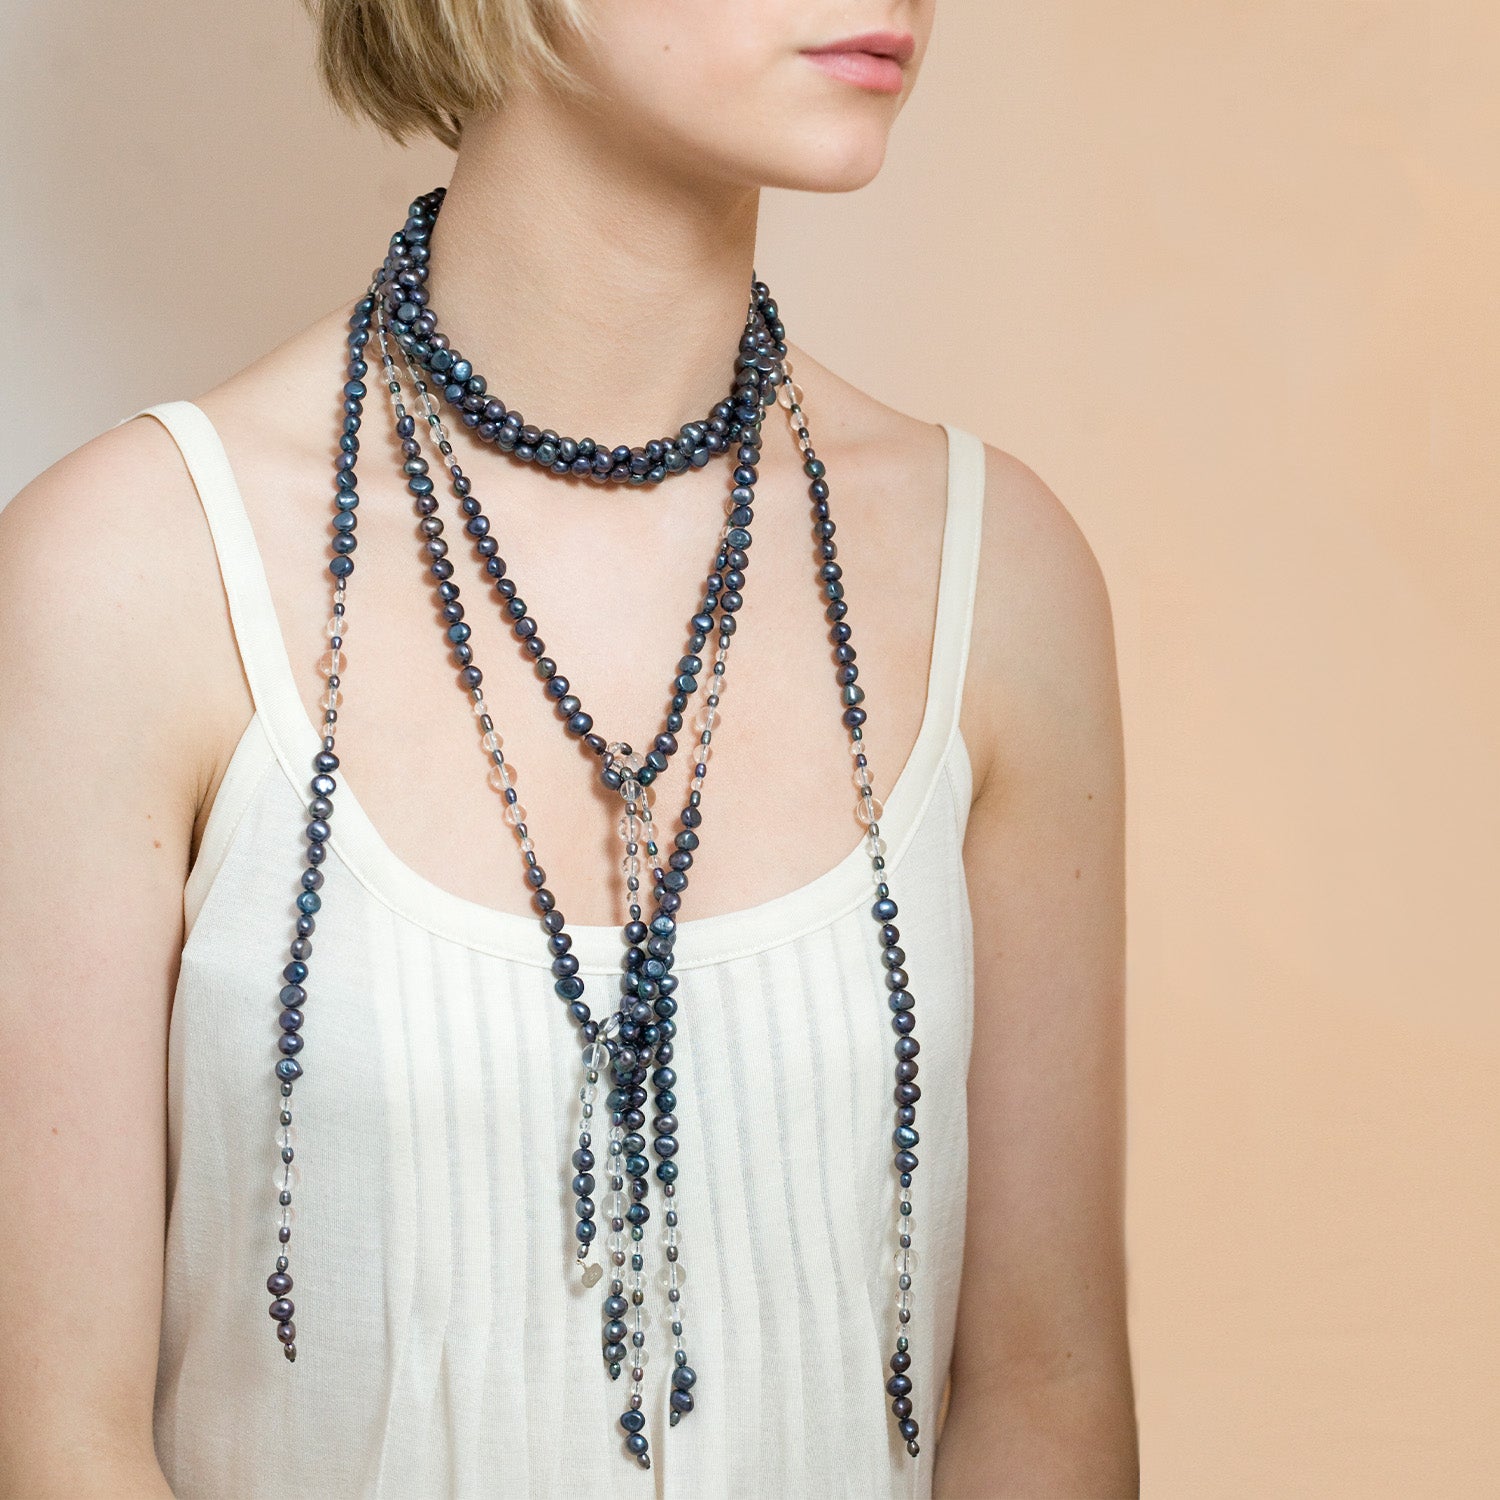 Triple Strand Long Lariat Necklace - in Peacock Black